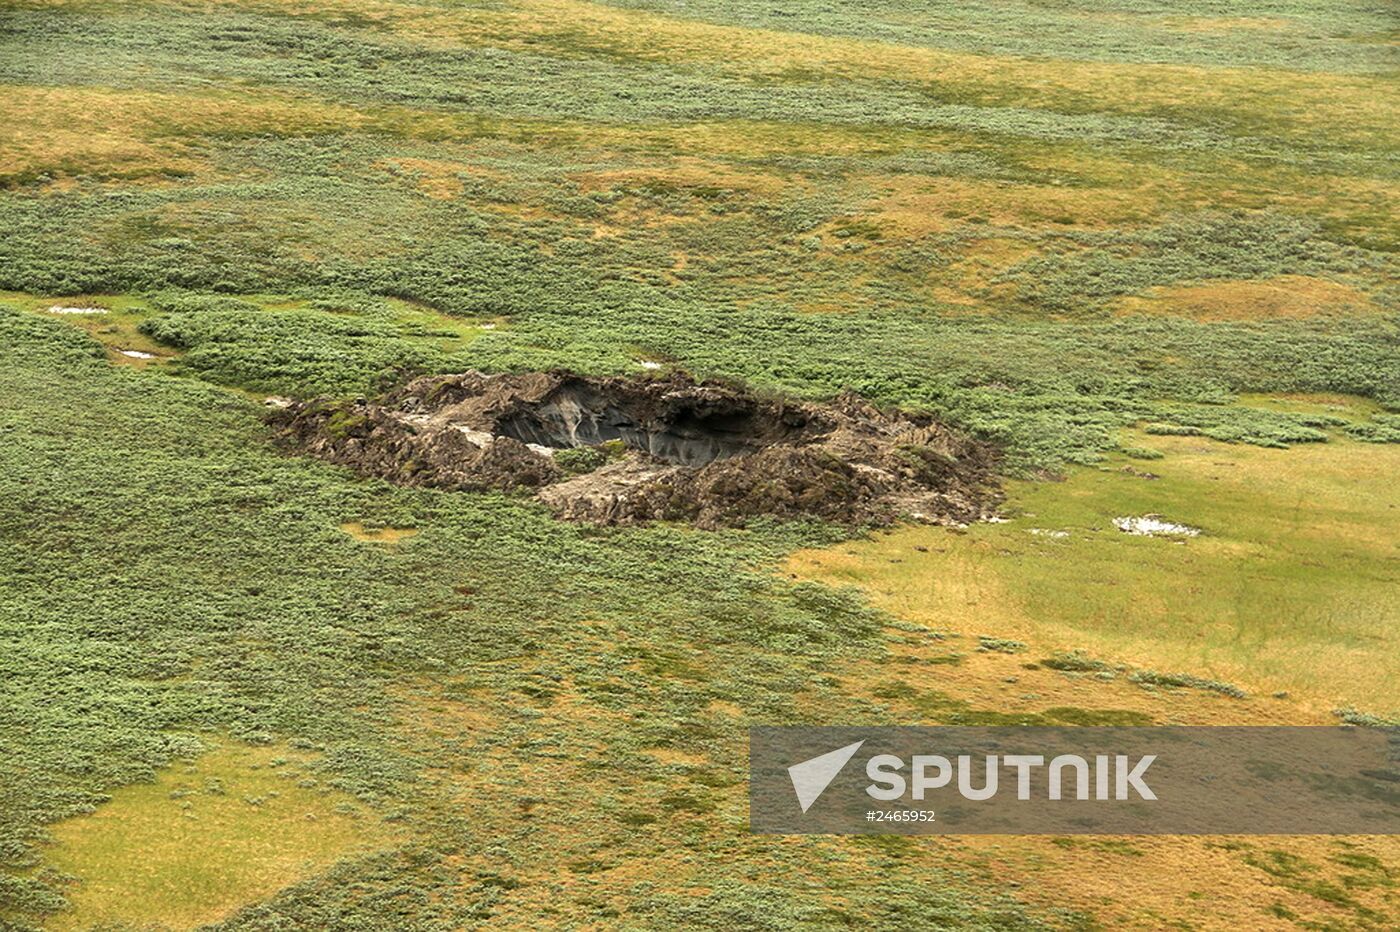 Crater of unknown origin discovered on Yamal